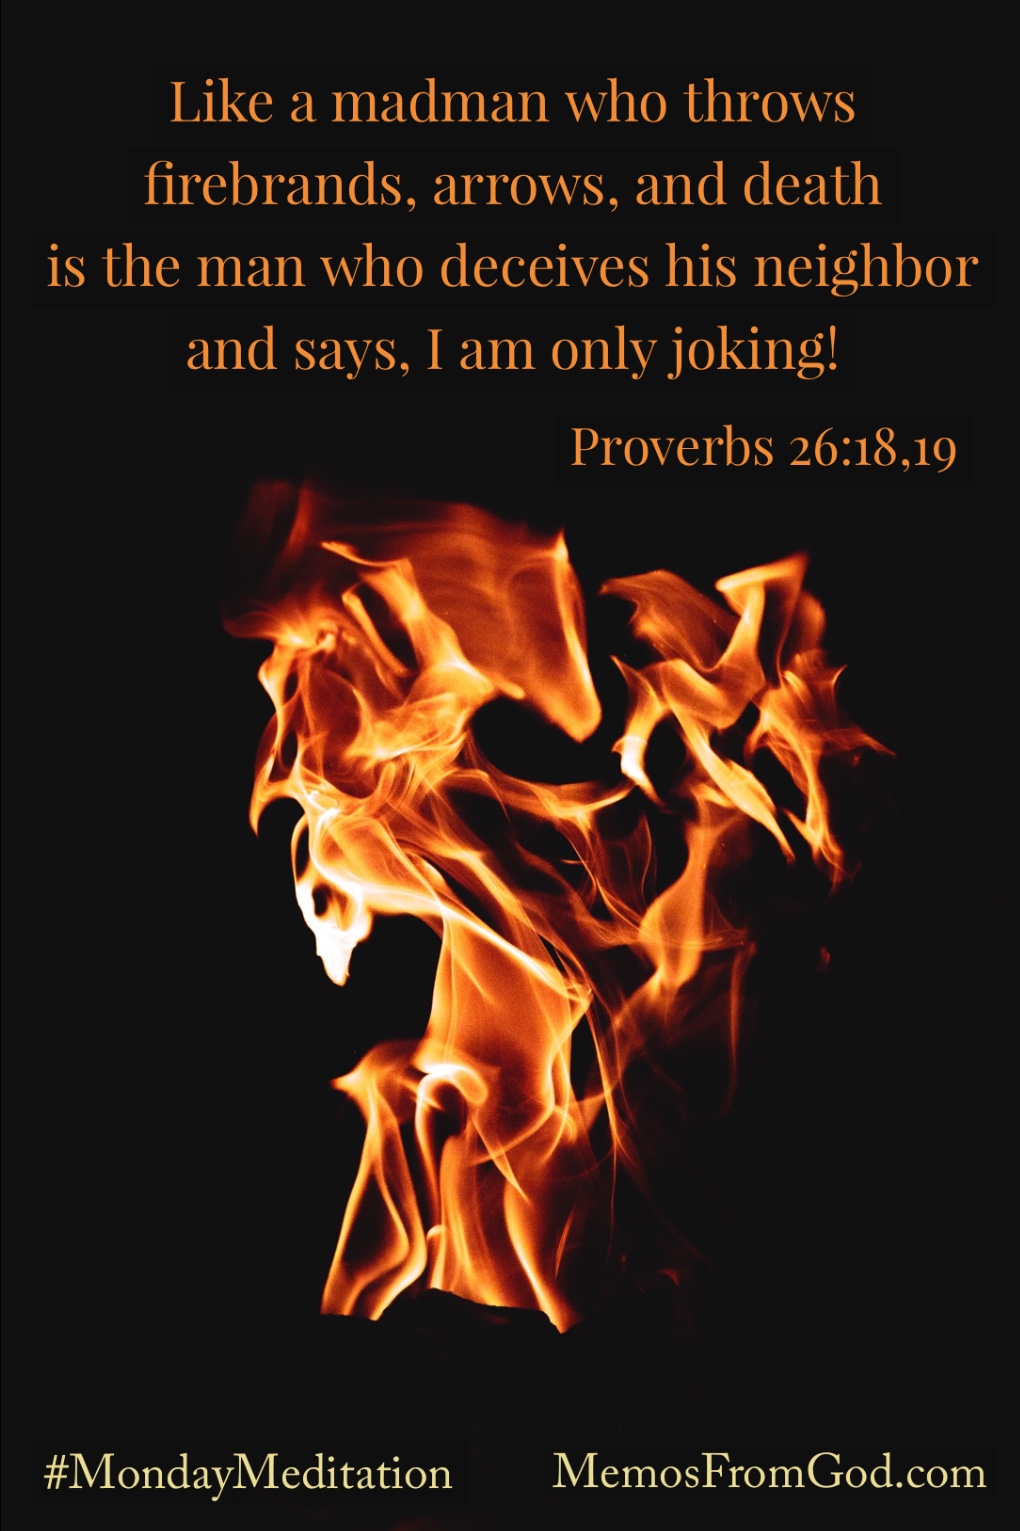 Like a madman who throws firebrands, arrows, and death is the man who deceives his neighbor and says, I am only joking! Proverbs 26:18-19